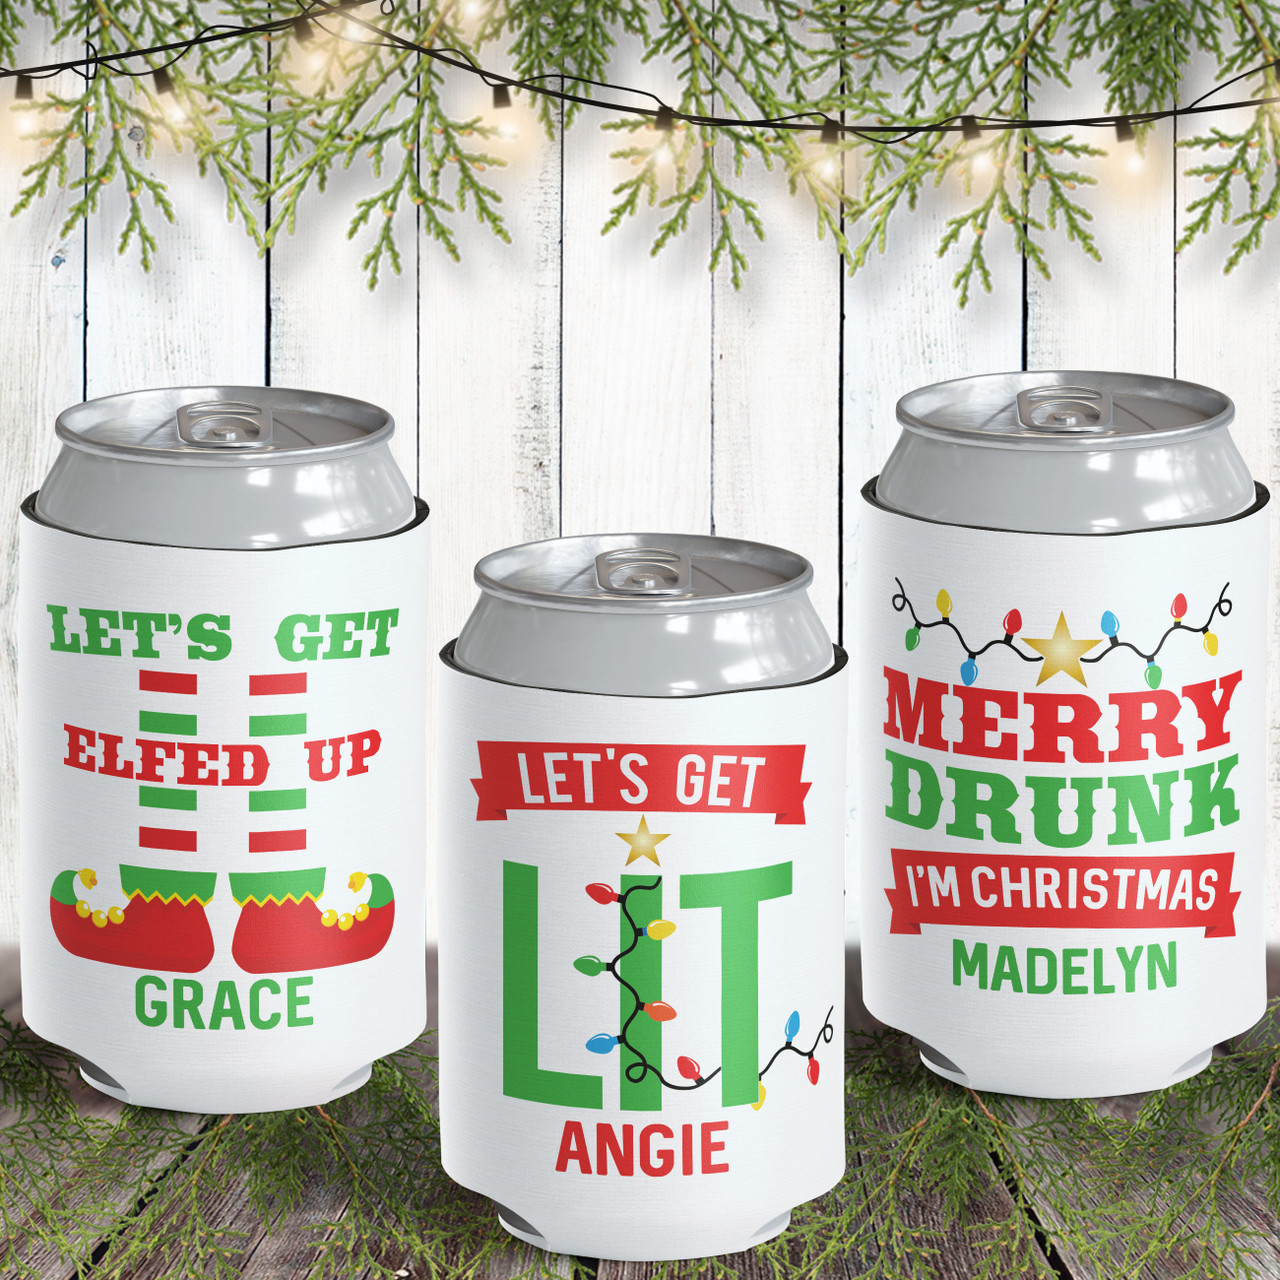 https://cdn11.bigcommerce.com/s-5grzuu6/images/stencil/1280x1280/products/5877/43731/Merry_Drunk_Christmas-Personalized_Can-Coolers__22434.1681854831.jpg?c=2